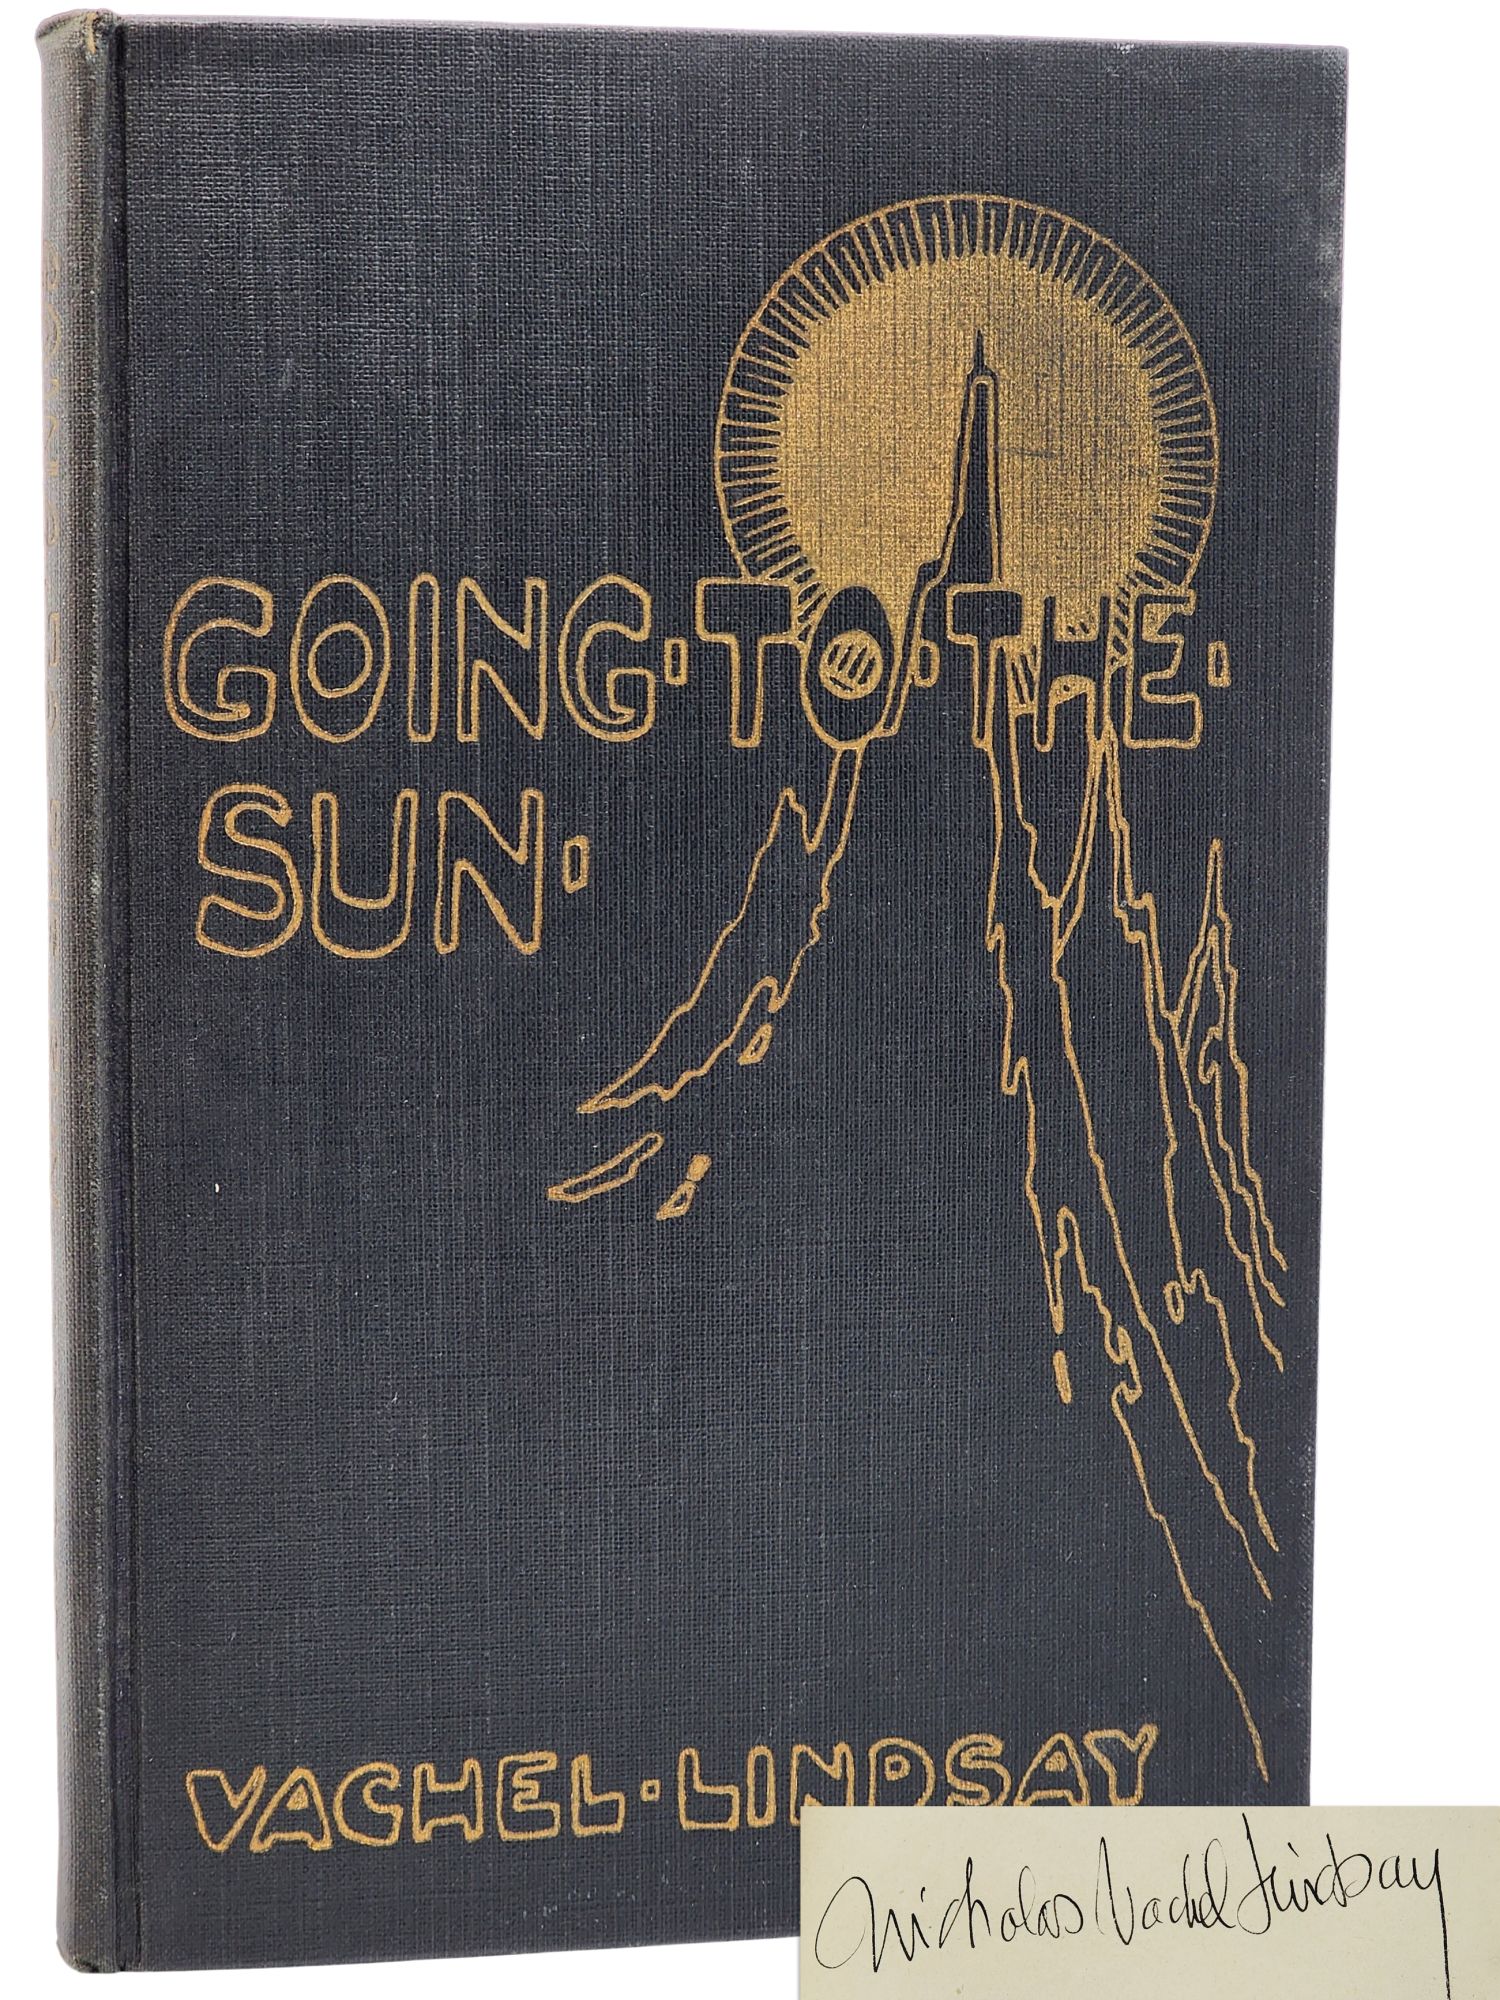 [Book #50903] GOING-TO-THE-SUN. Vachel Lindsay.